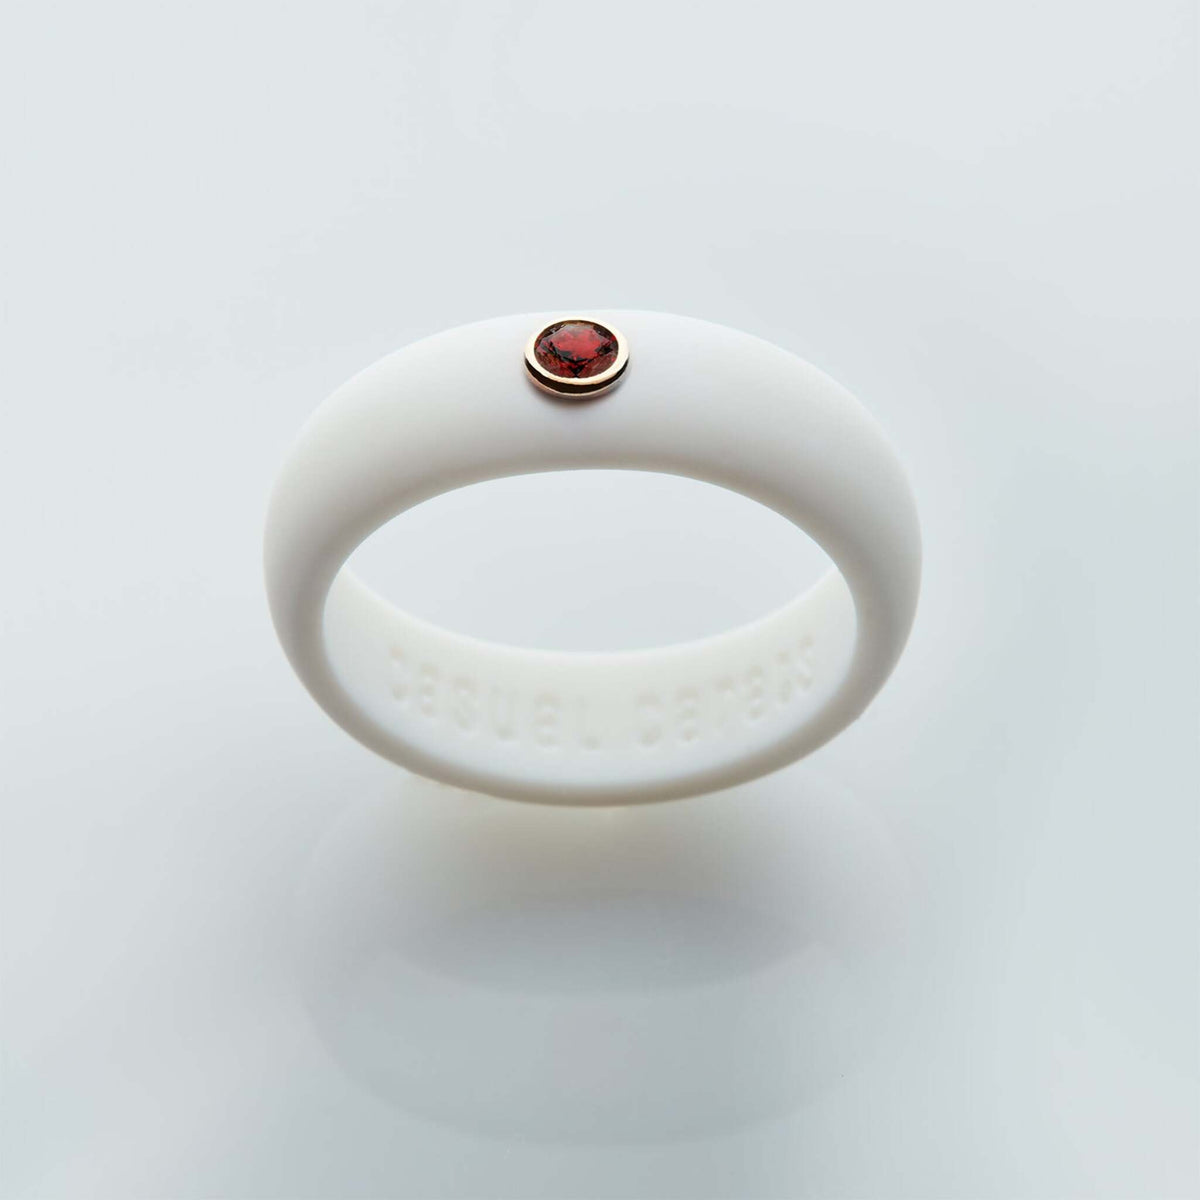 Casual Carats - Birthstone Collection - January - Garnet Silicone Ring / Available in a Variety of Silicone Band Colors